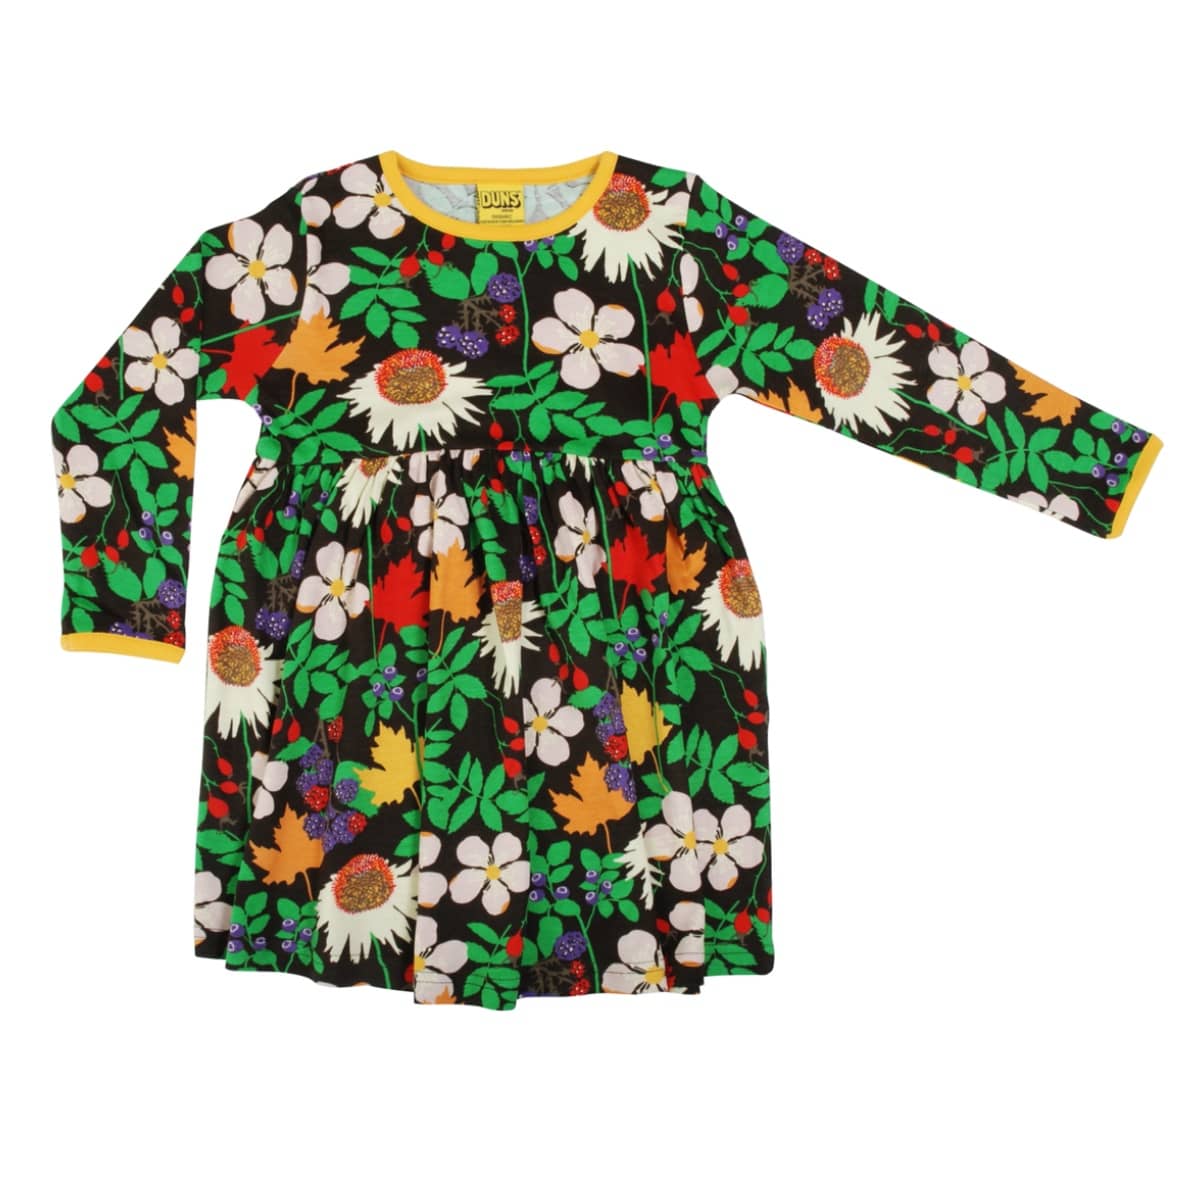 Home to rainbow bright organic ethical children's clothes | Uni and Jack